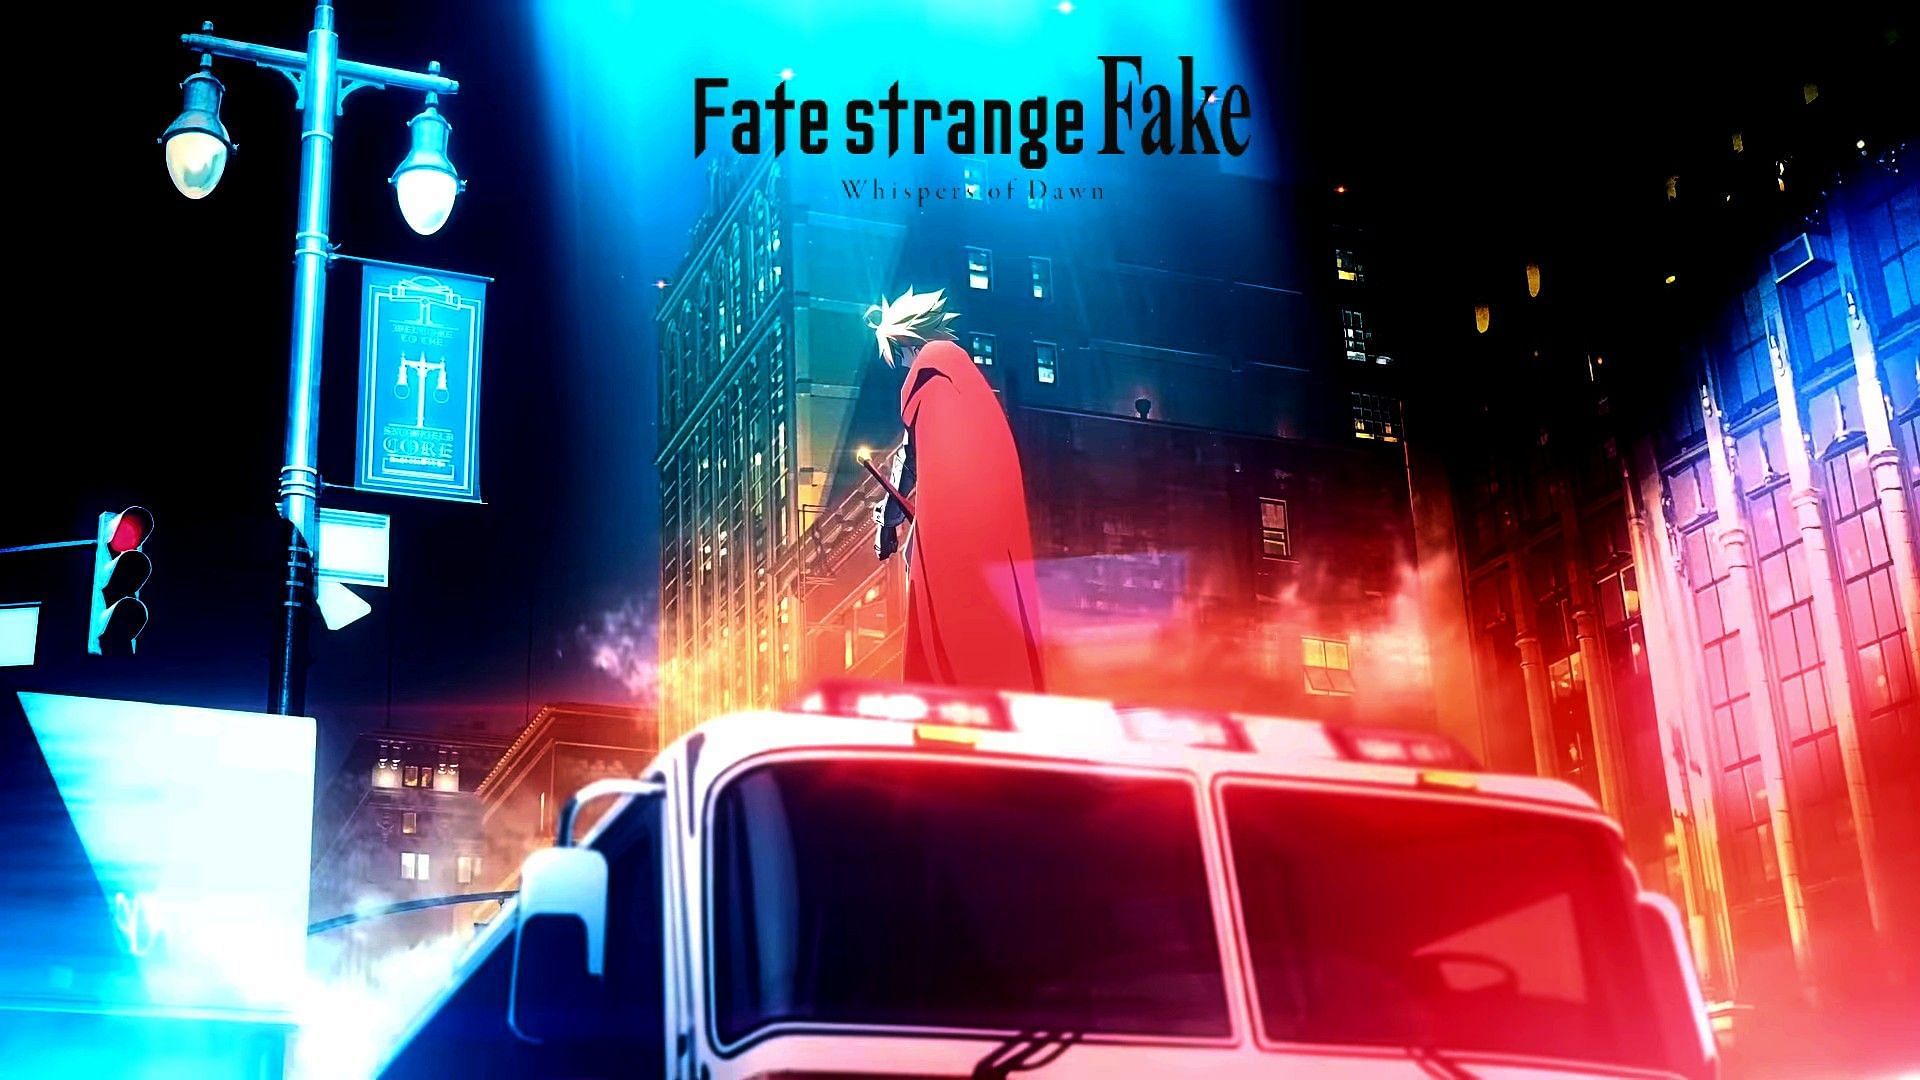 Fate/strange Fake - Whispers of Dawn TV anime special announced (Image via Aniplex) 